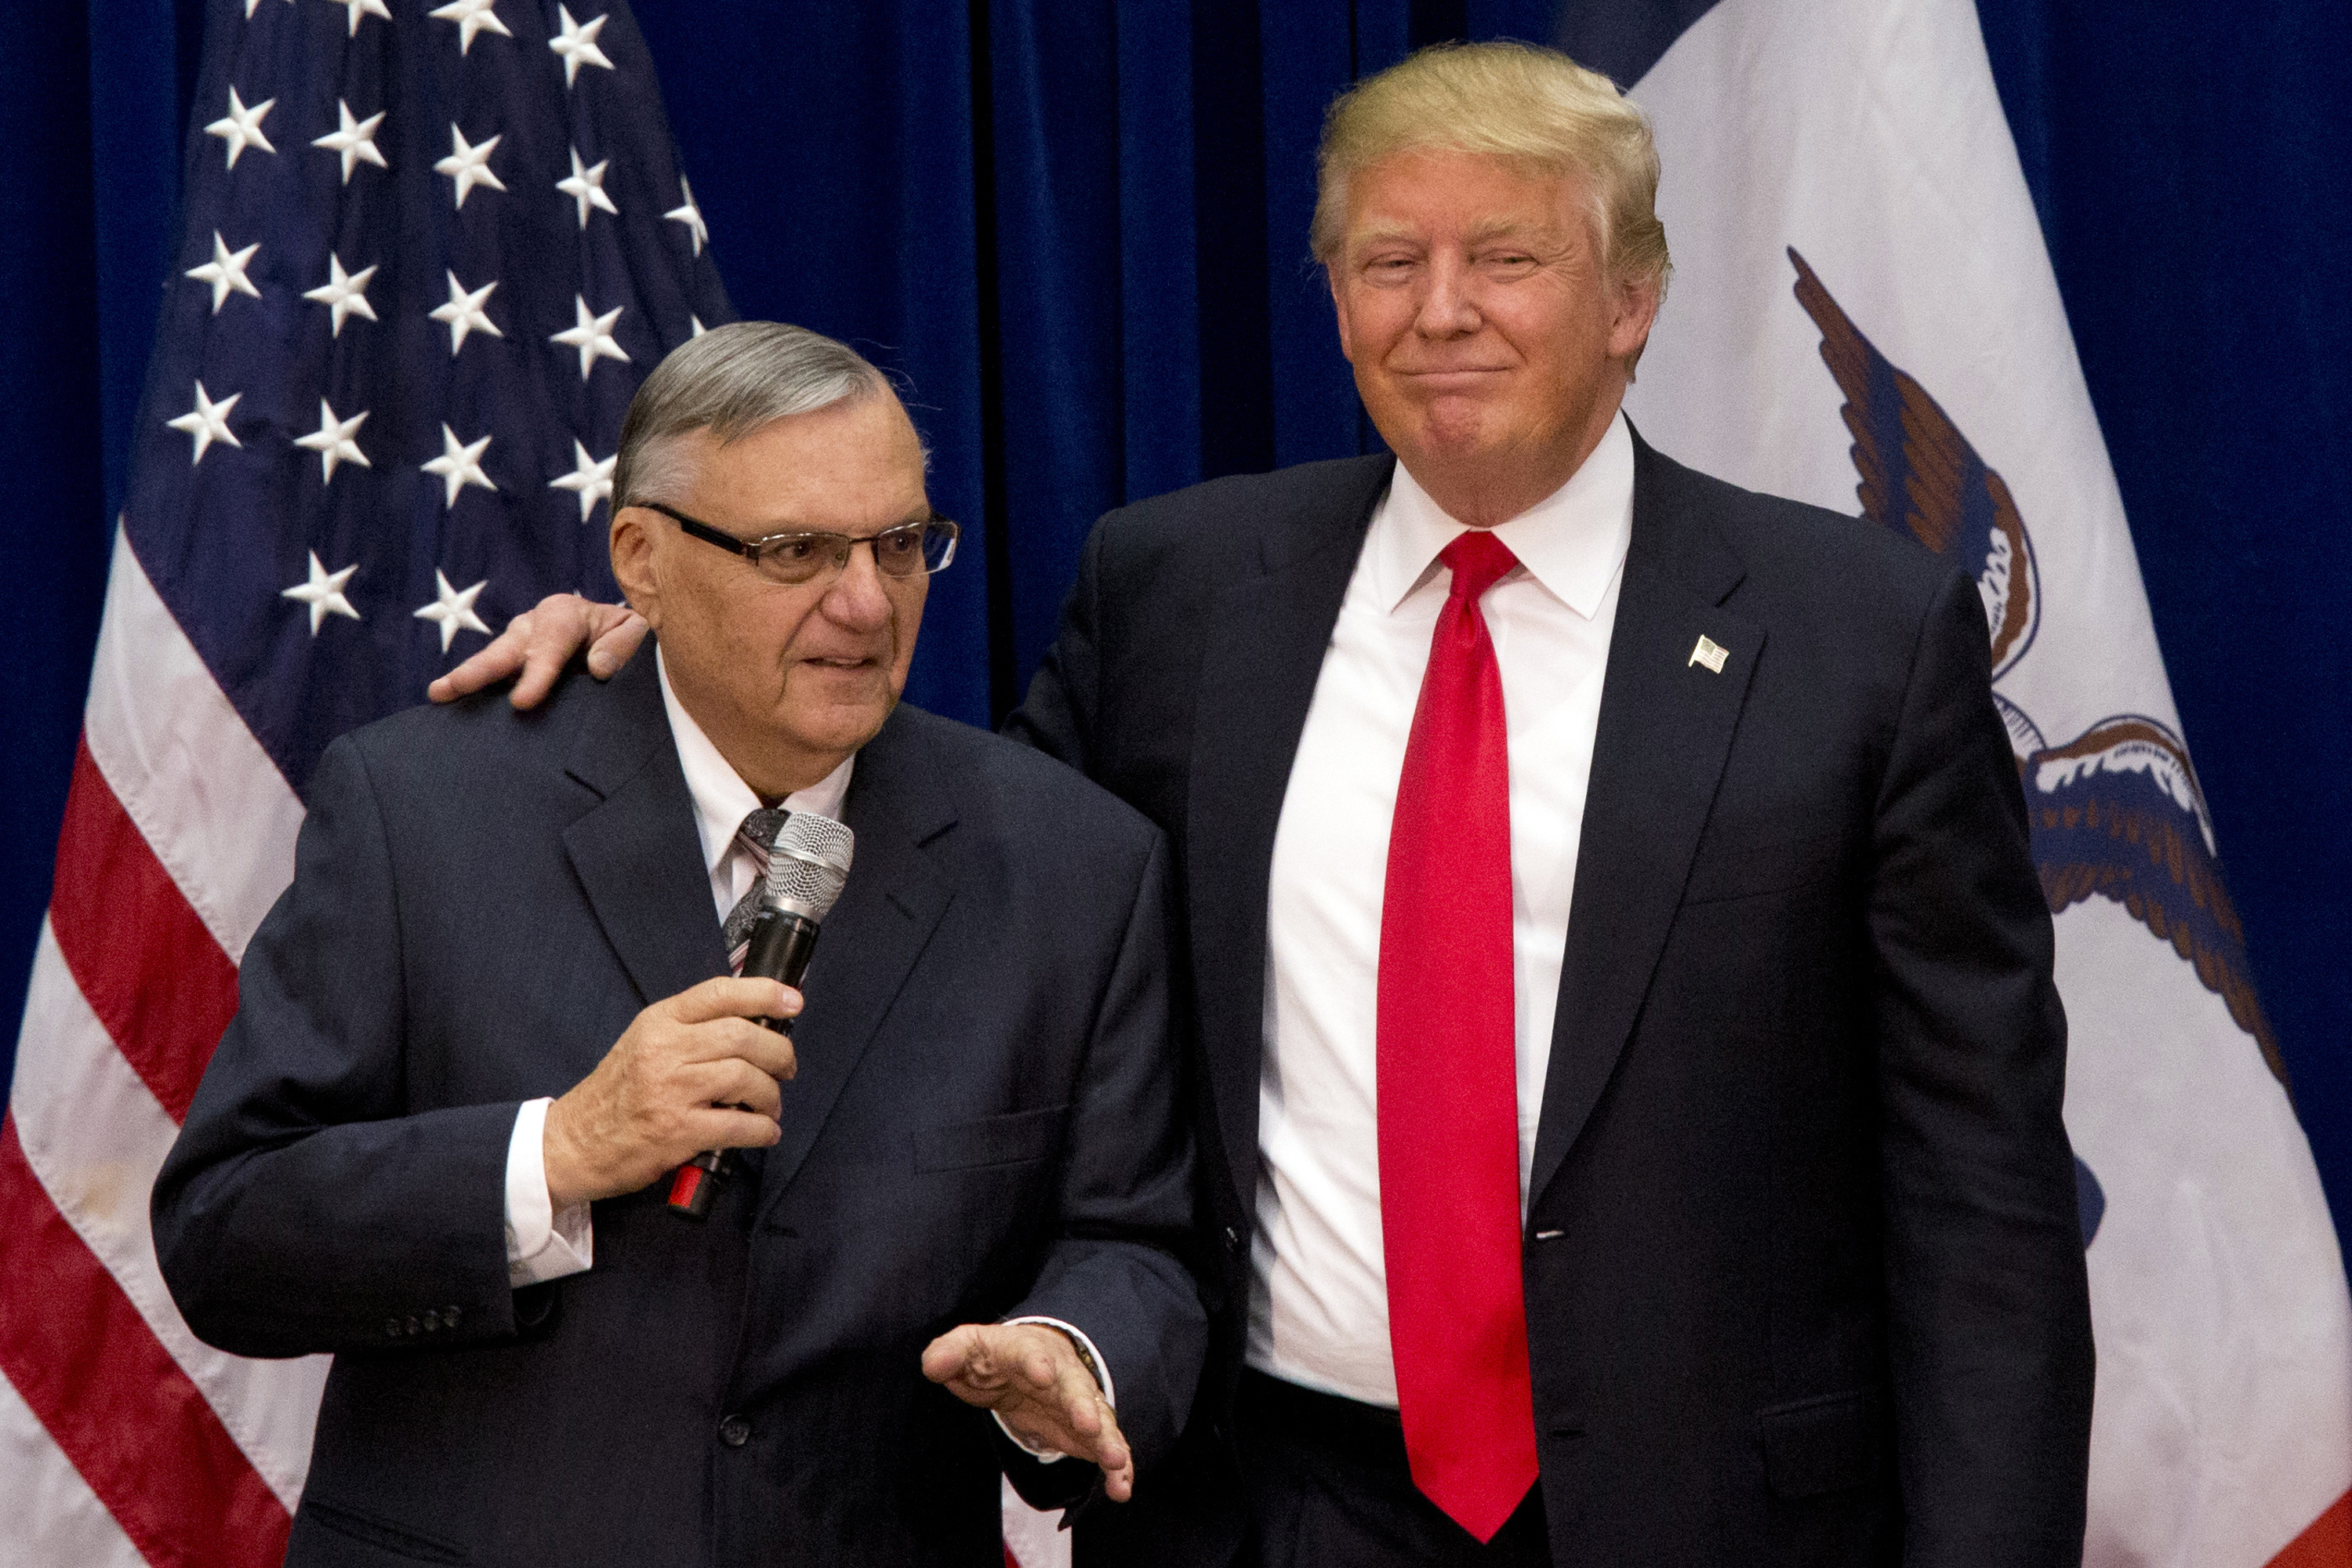 Republican presidential candidate Donald Trump is joined by Joe Arpaio, the sheriff of metro Phoenix, at a campaign event in Marshalltown, Iowa on Jan. 26, 2016. (Mary Altaffer&mdash;AP)